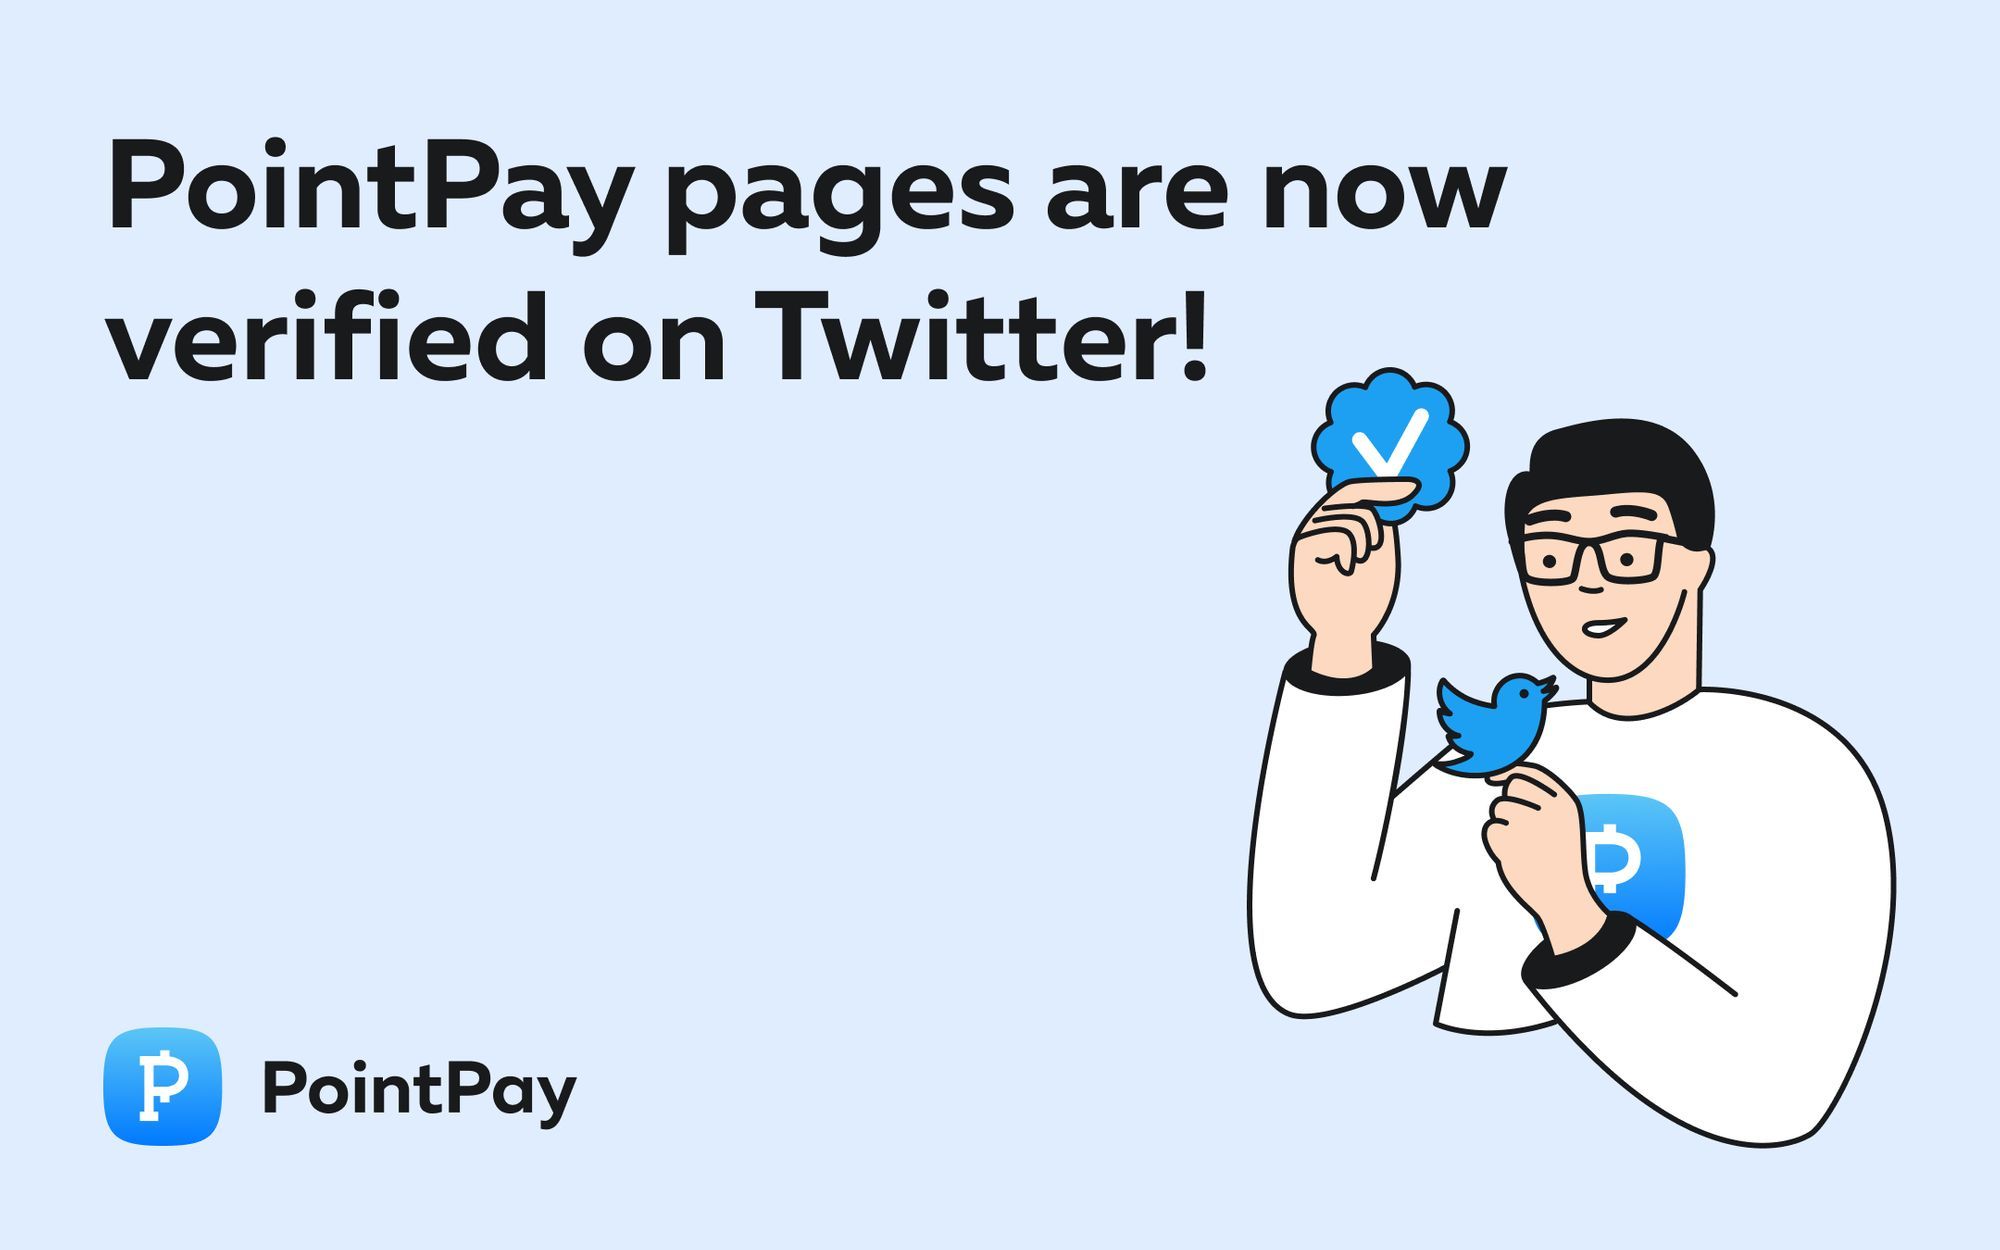 PointPay pages are now verified on Twitter!